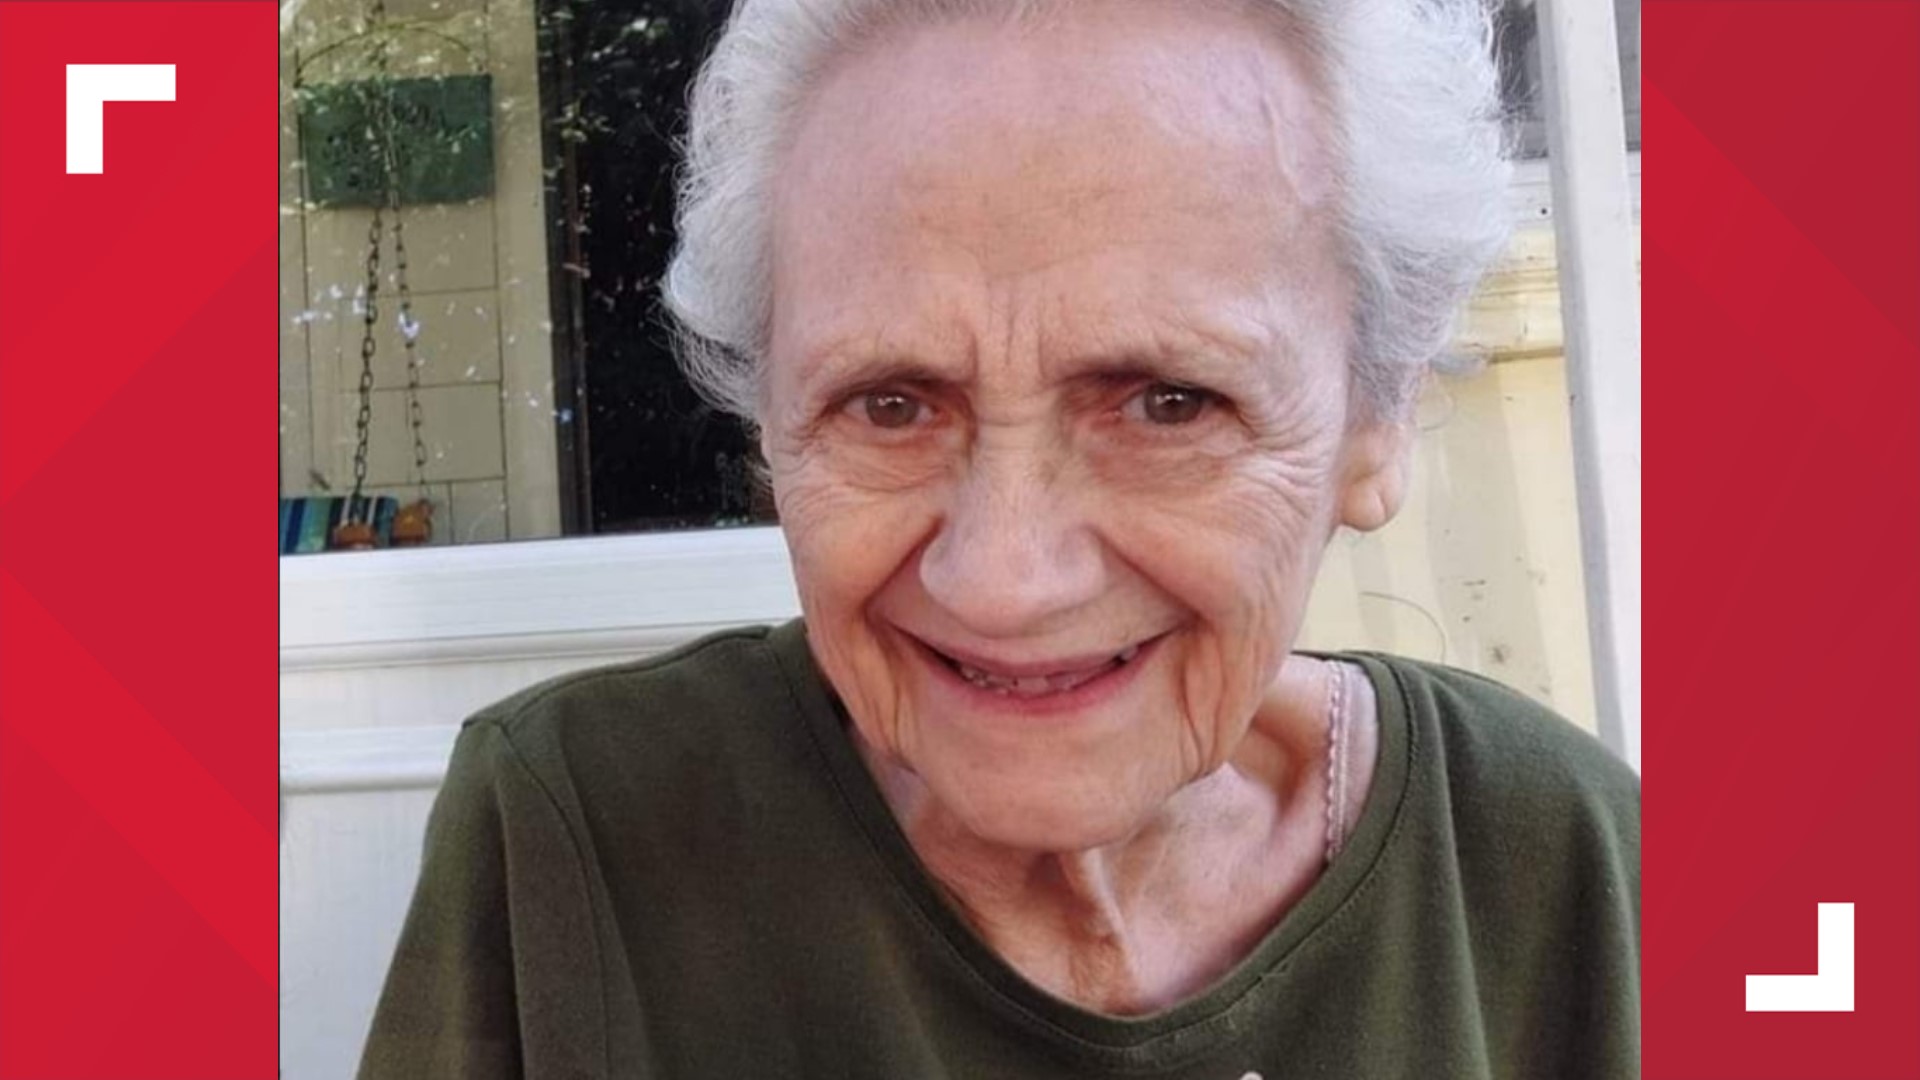 Police said Connie Turner had dementia and left home on foot Tuesday night.